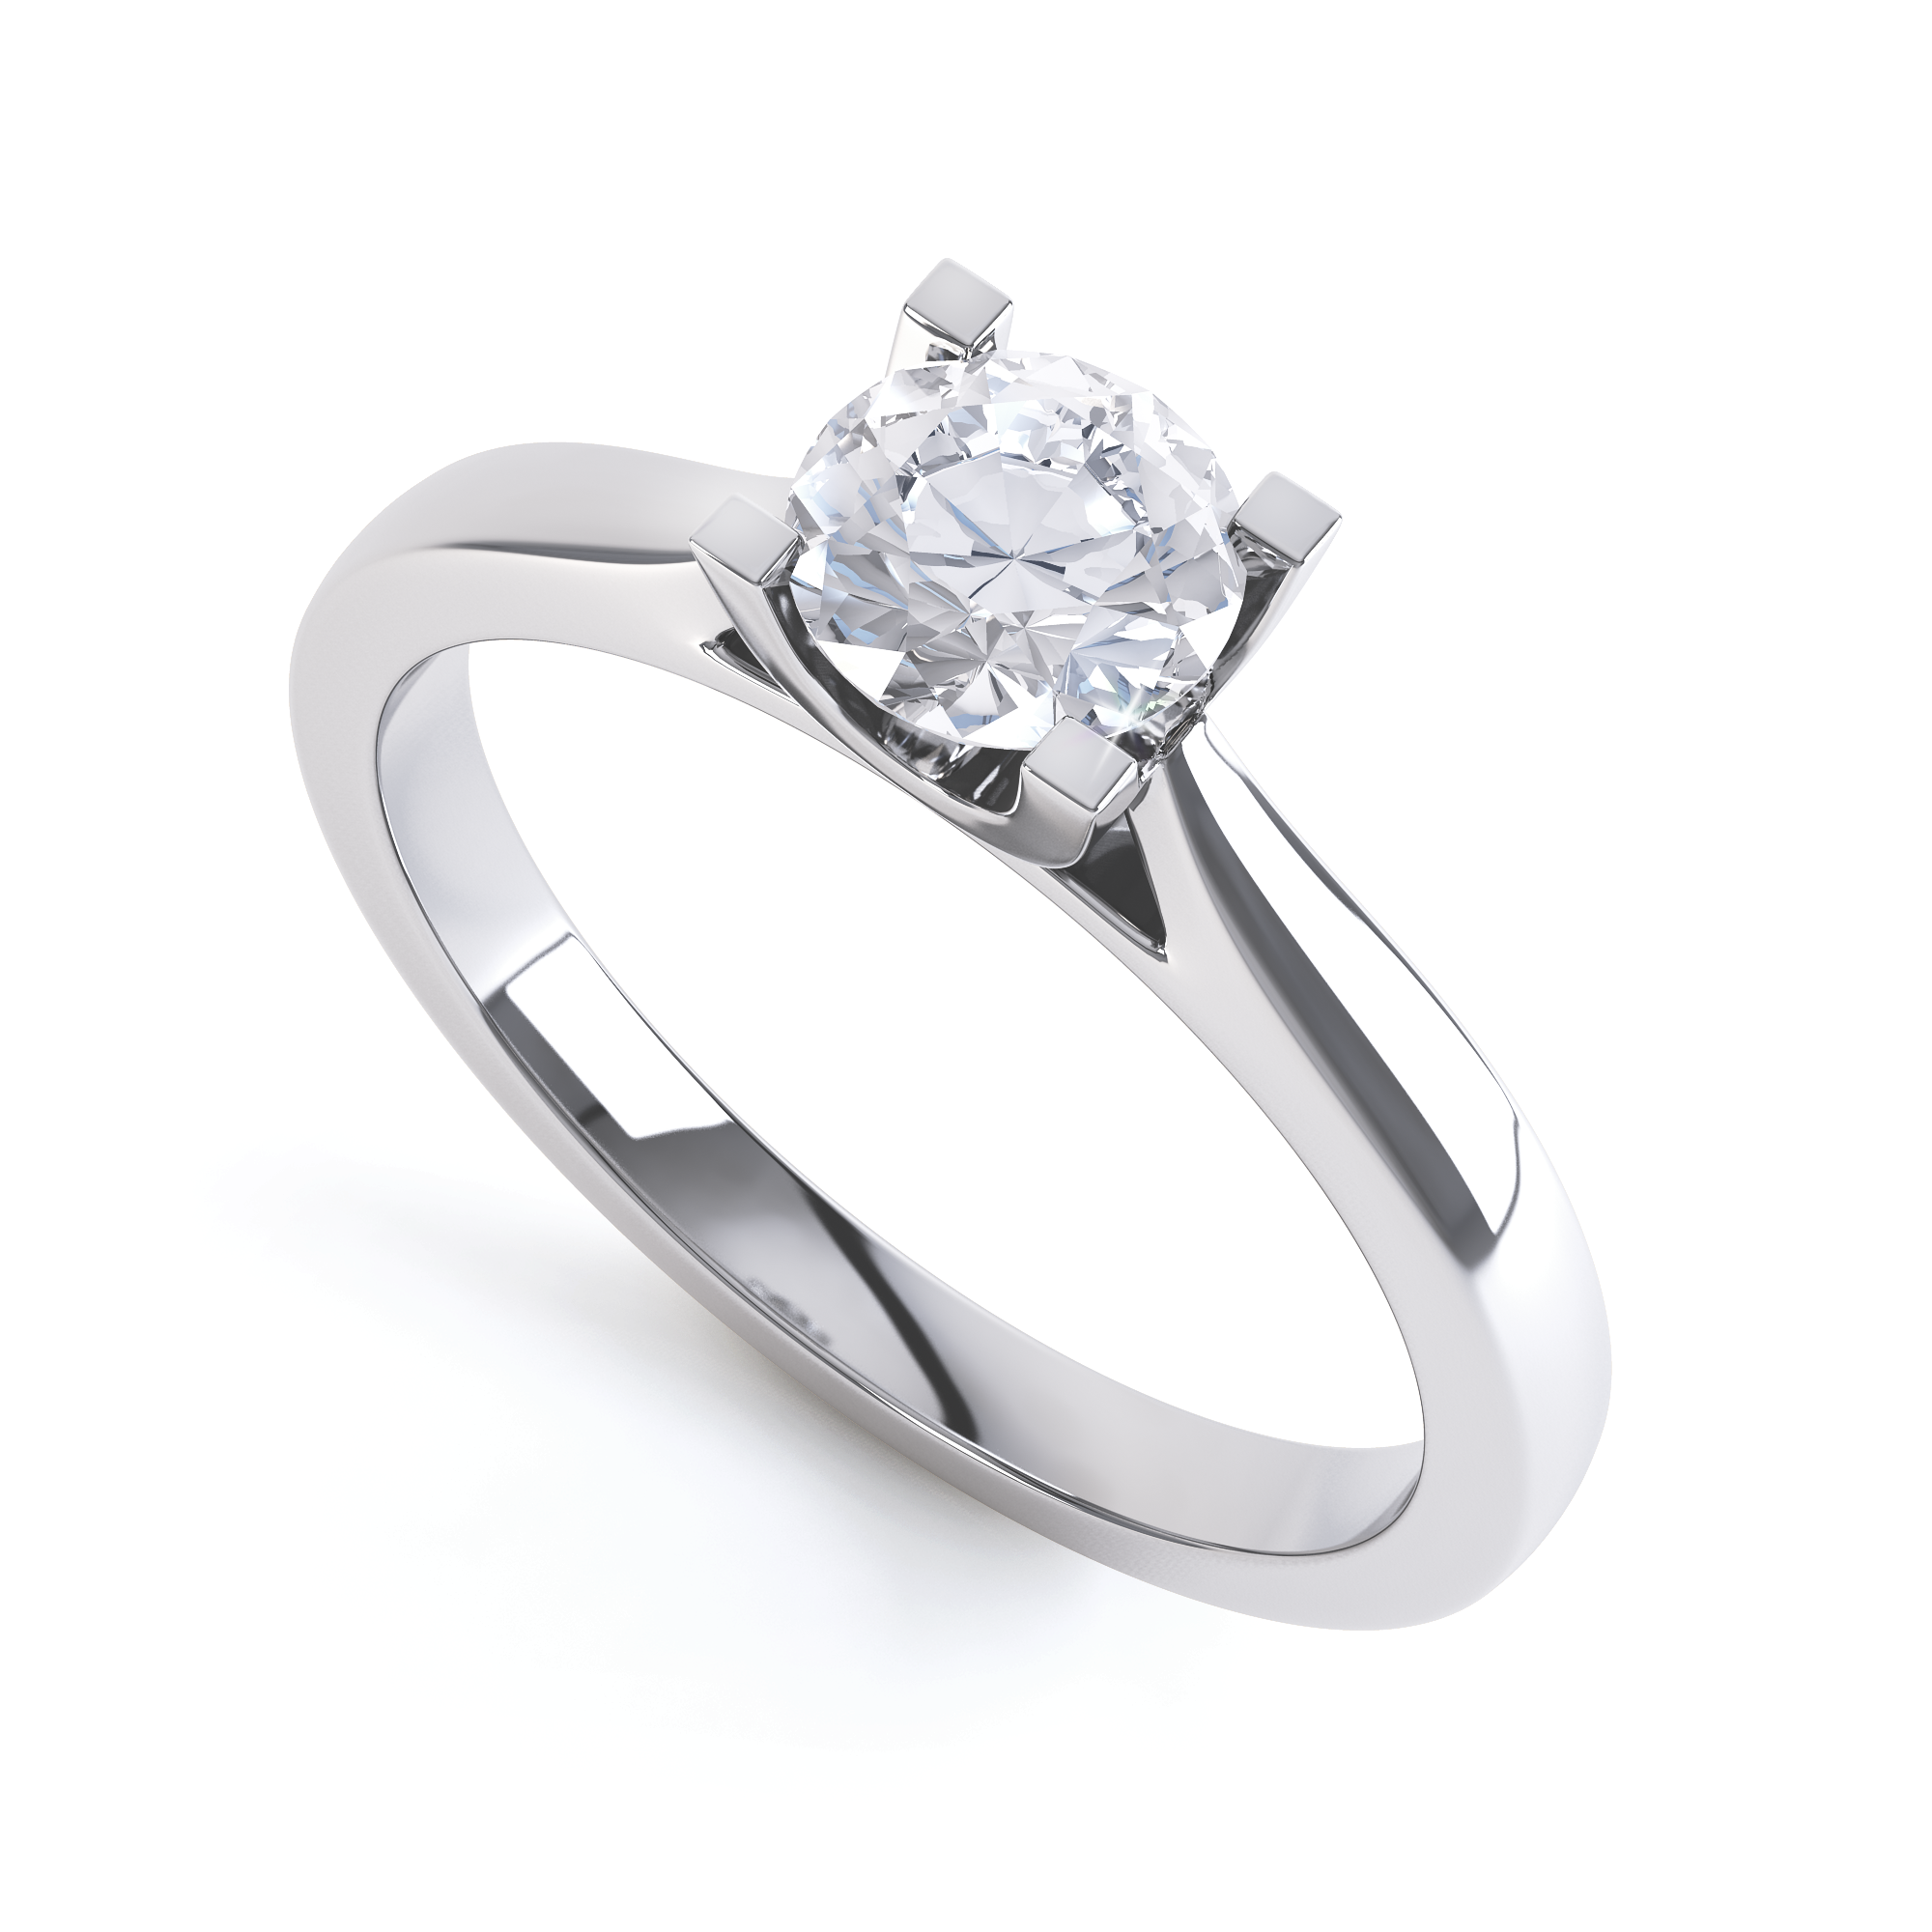 Round Brilliant Cut Centre Stone, Four claw, Tapered Shoulders, Diamond Engagement Ring